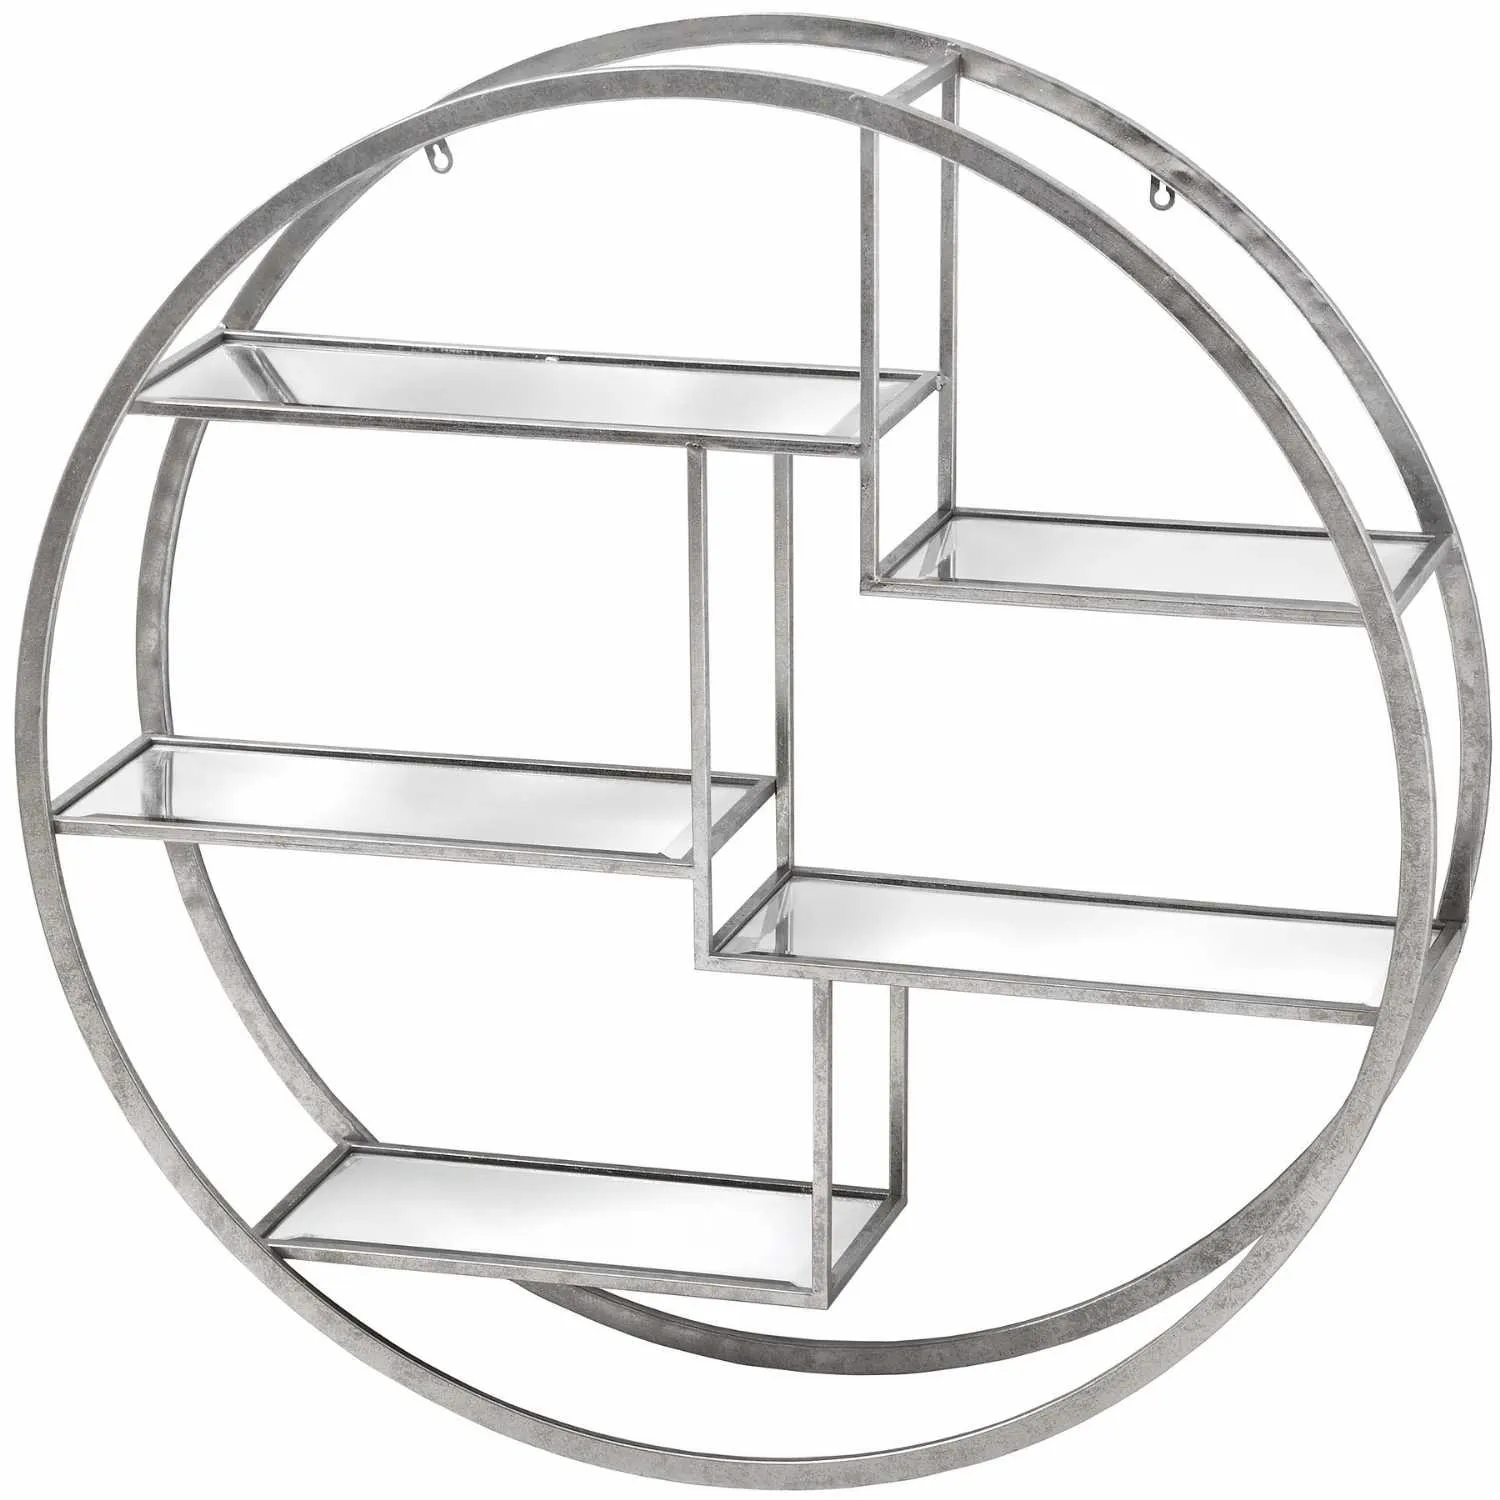 Large Circular Silver Wall Hanging Multi Shelf Unit With Glass Shelves